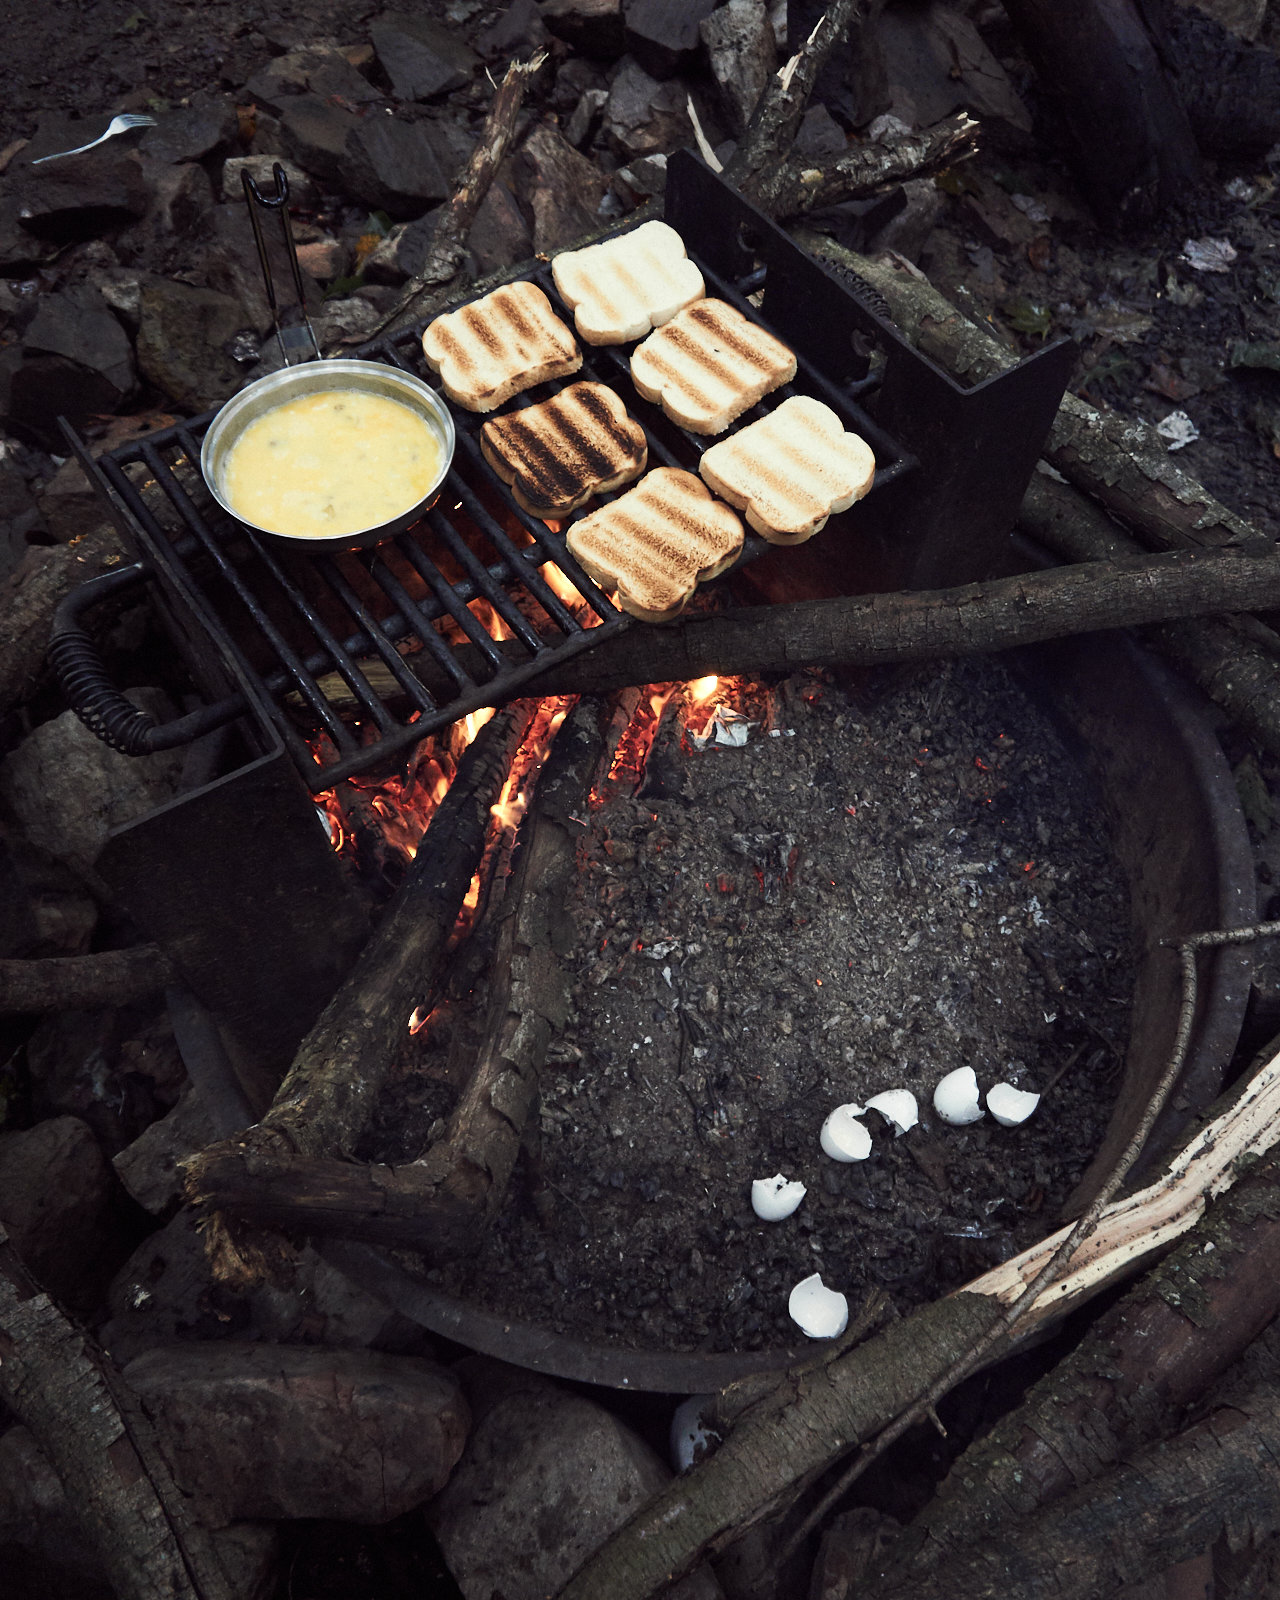 A Breakfast in Nature - camping - campfire - hiking - Tuscarora State Forest